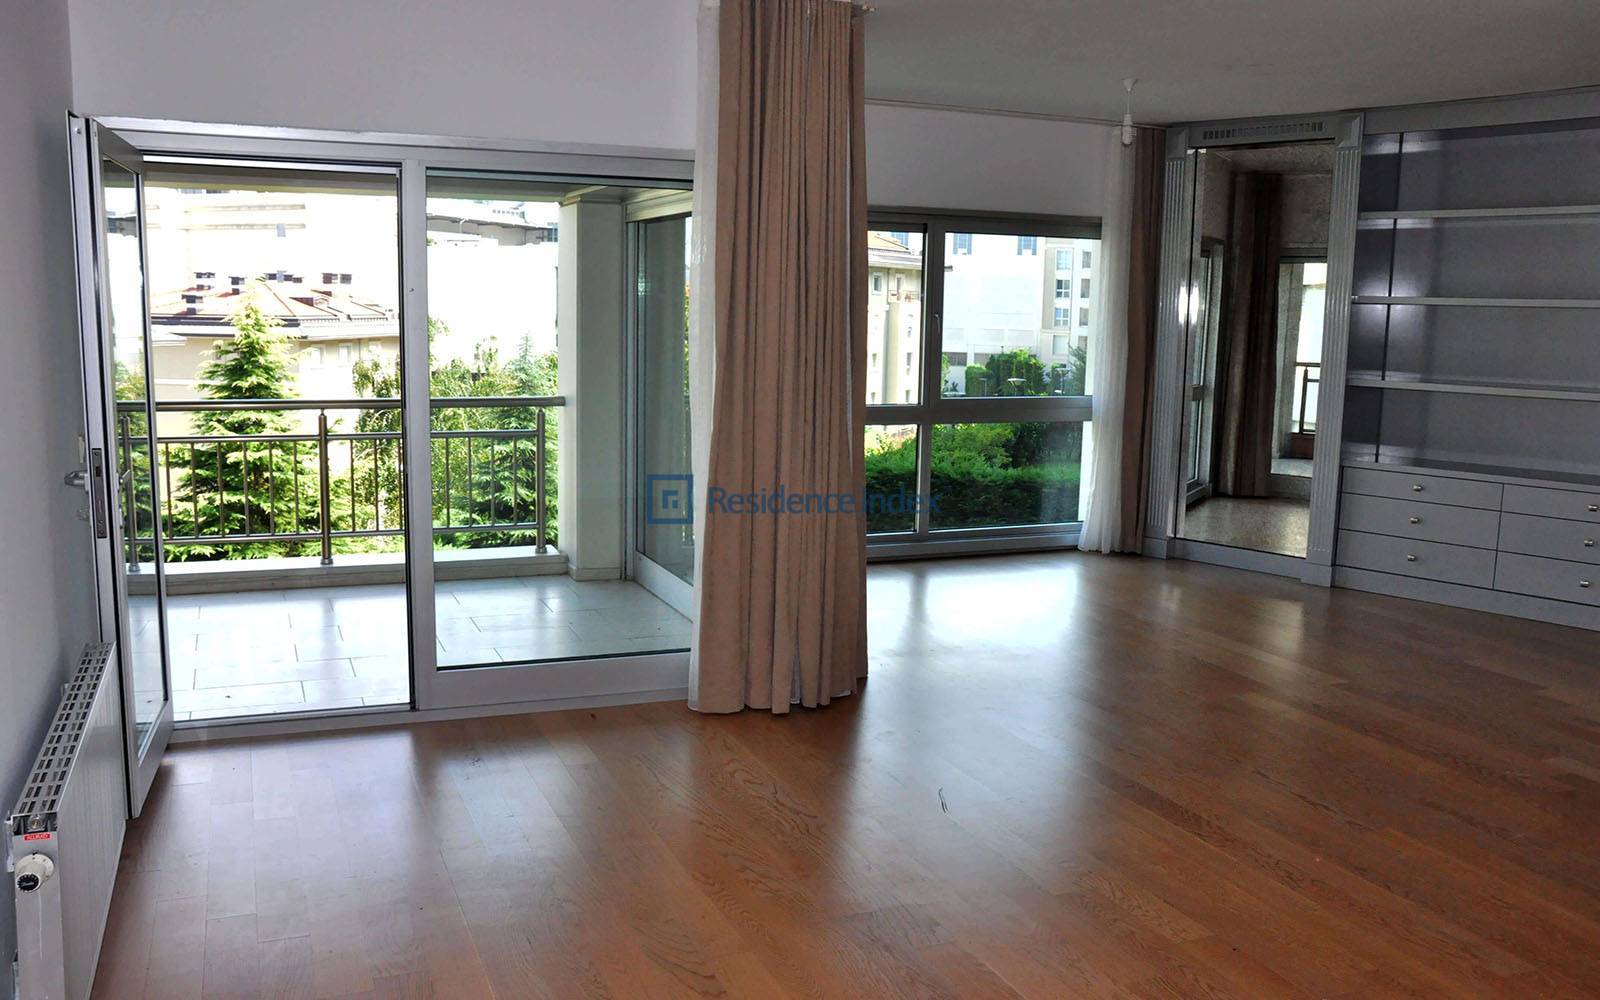 İstinye Park Residence - 3 + 1 Spacious Apartment For Sale